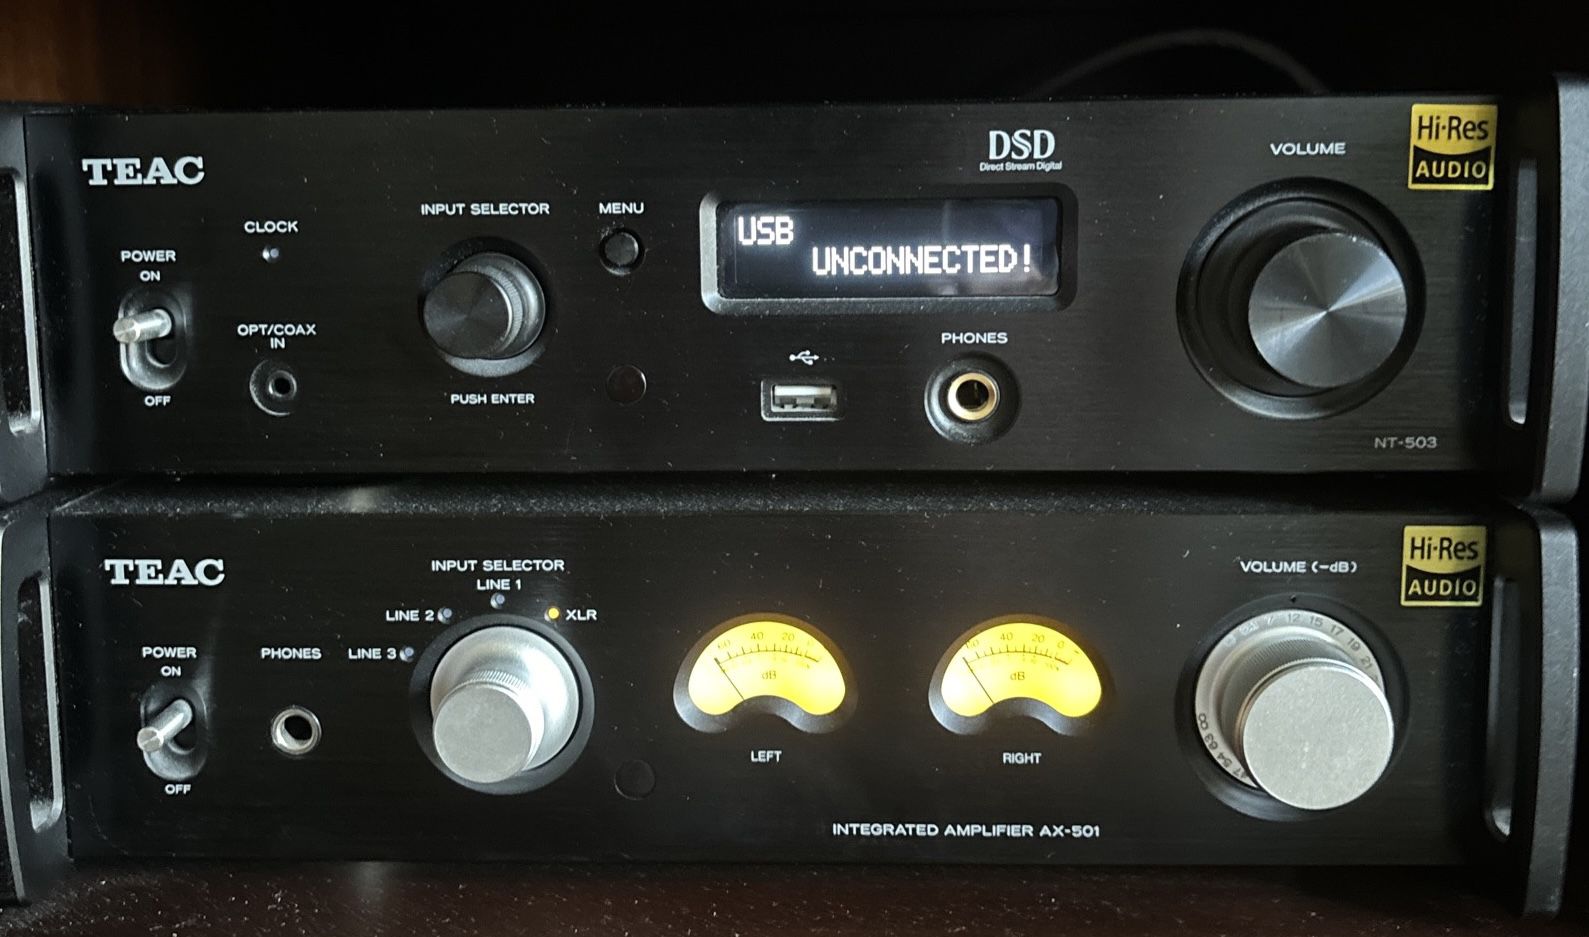 TEAC Reference Series AX-501 Amplifier and NT-503 DAC/Network Player, Like New Condition Retail $2,200